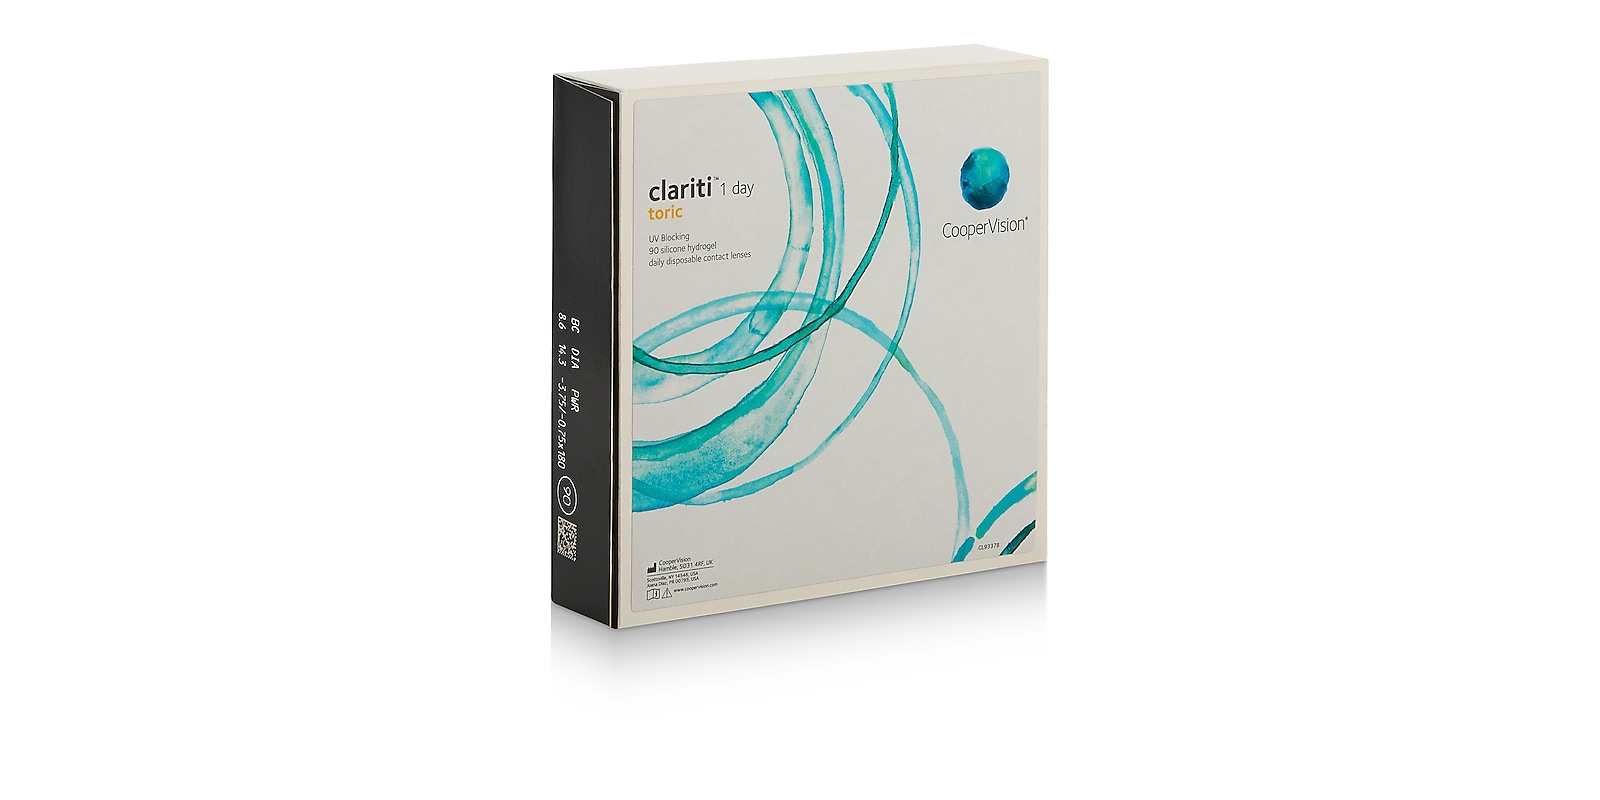 Clariti 1 Day Toric, 90 pack contact lenses